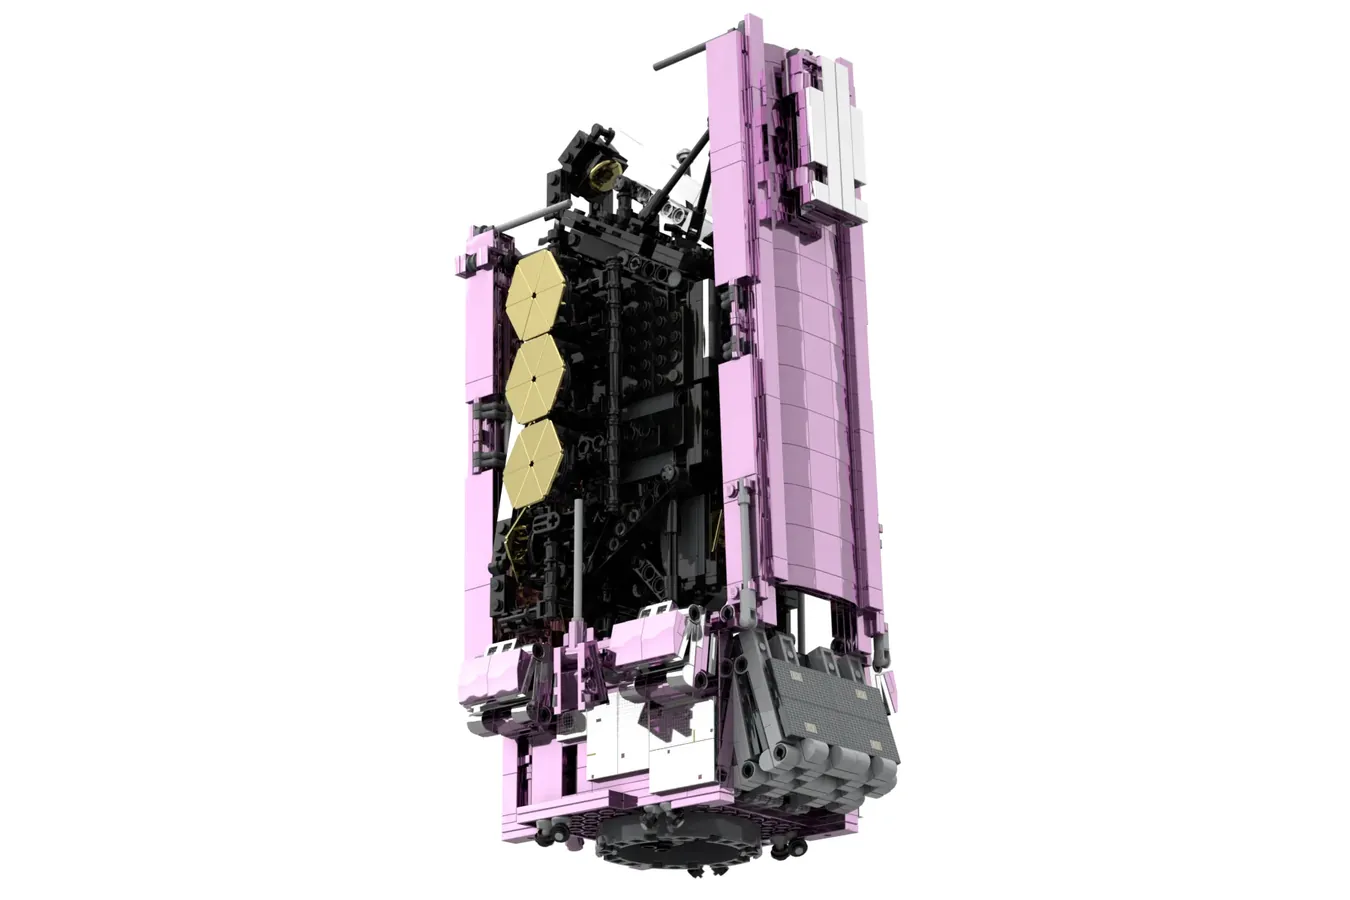 Lego (R) ideas for James Webb Space Telescope ] has entered the product review!Introducing the 3rd 10,000 support design in 2022